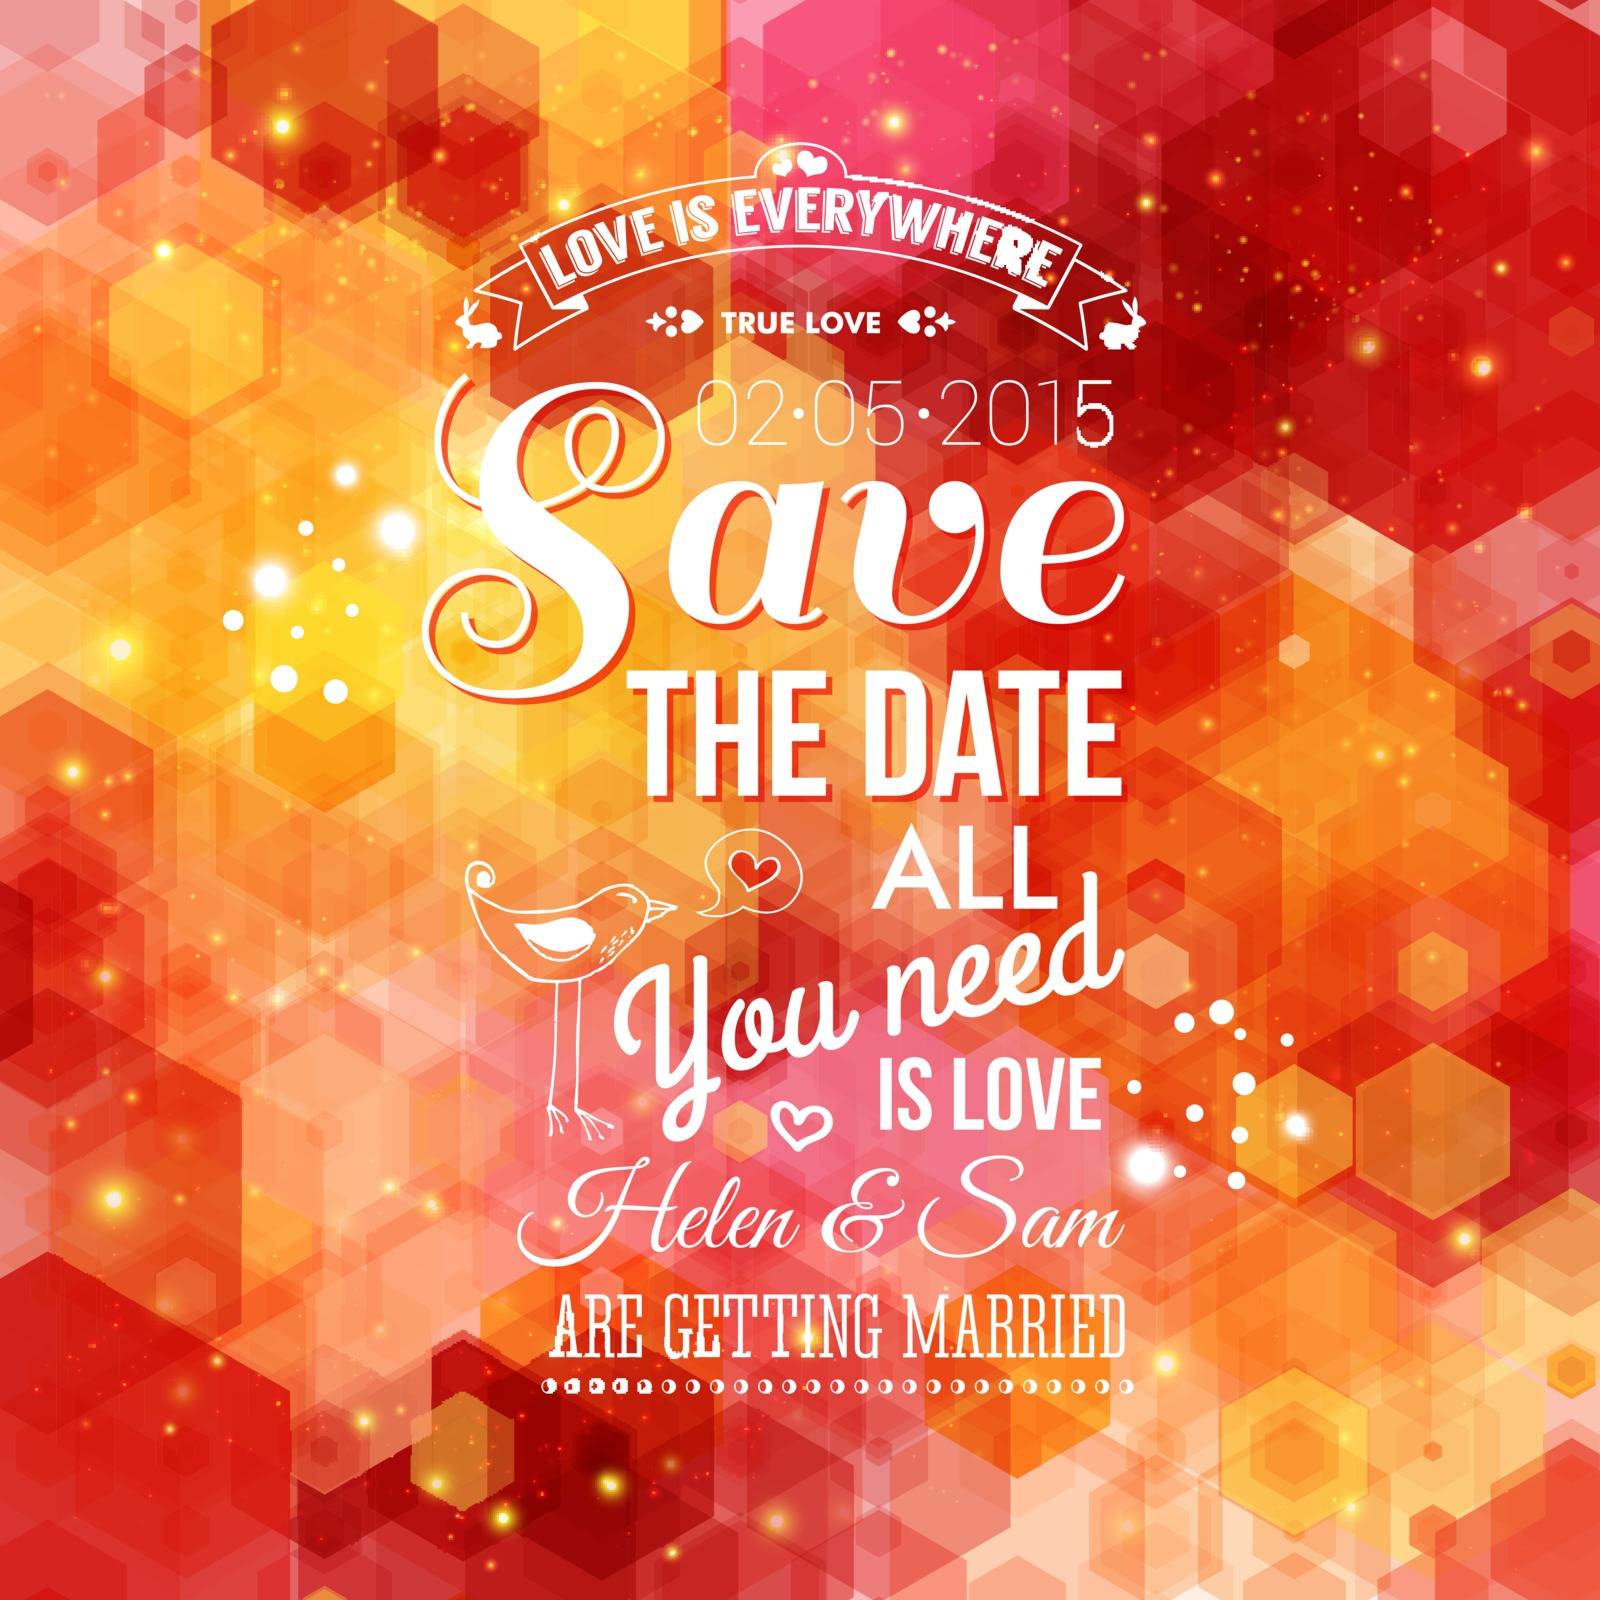 Save the date for personal holiday. Wedding invitation on a bright hexagon background. Vector illustration. 